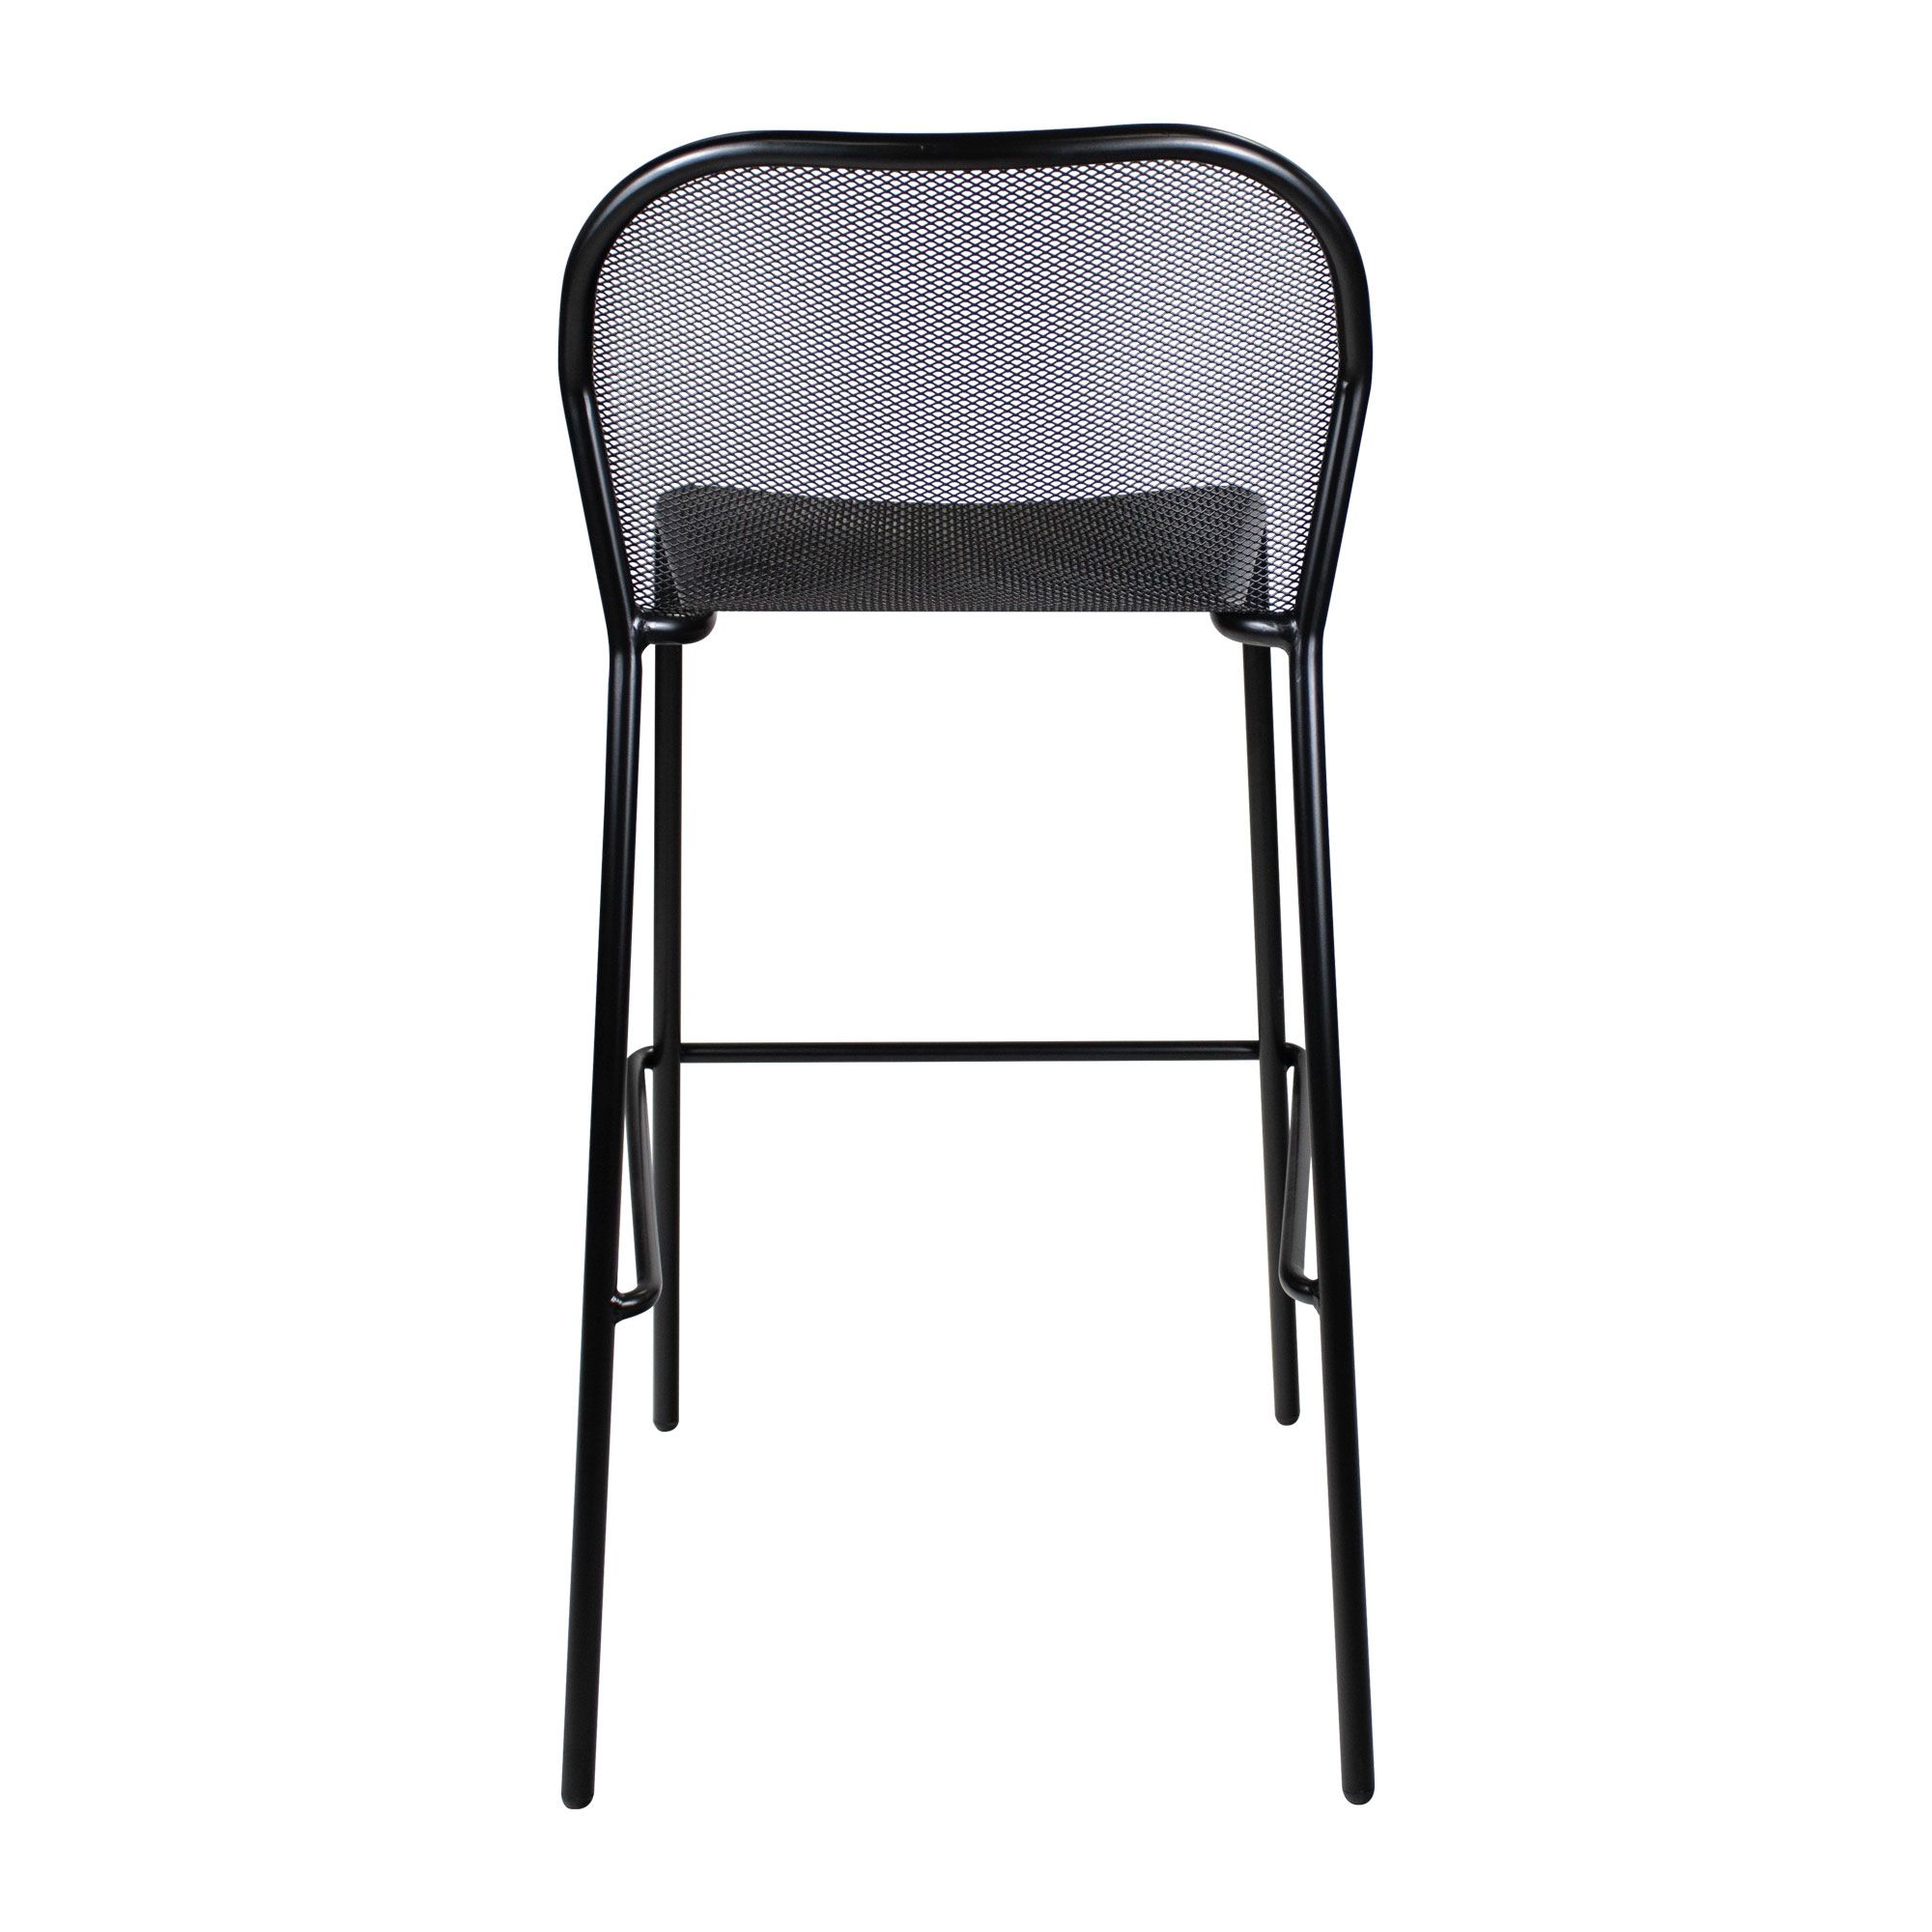 Black Nova Stackable Bar Stool for Indoor and Outdoor Use - Back View